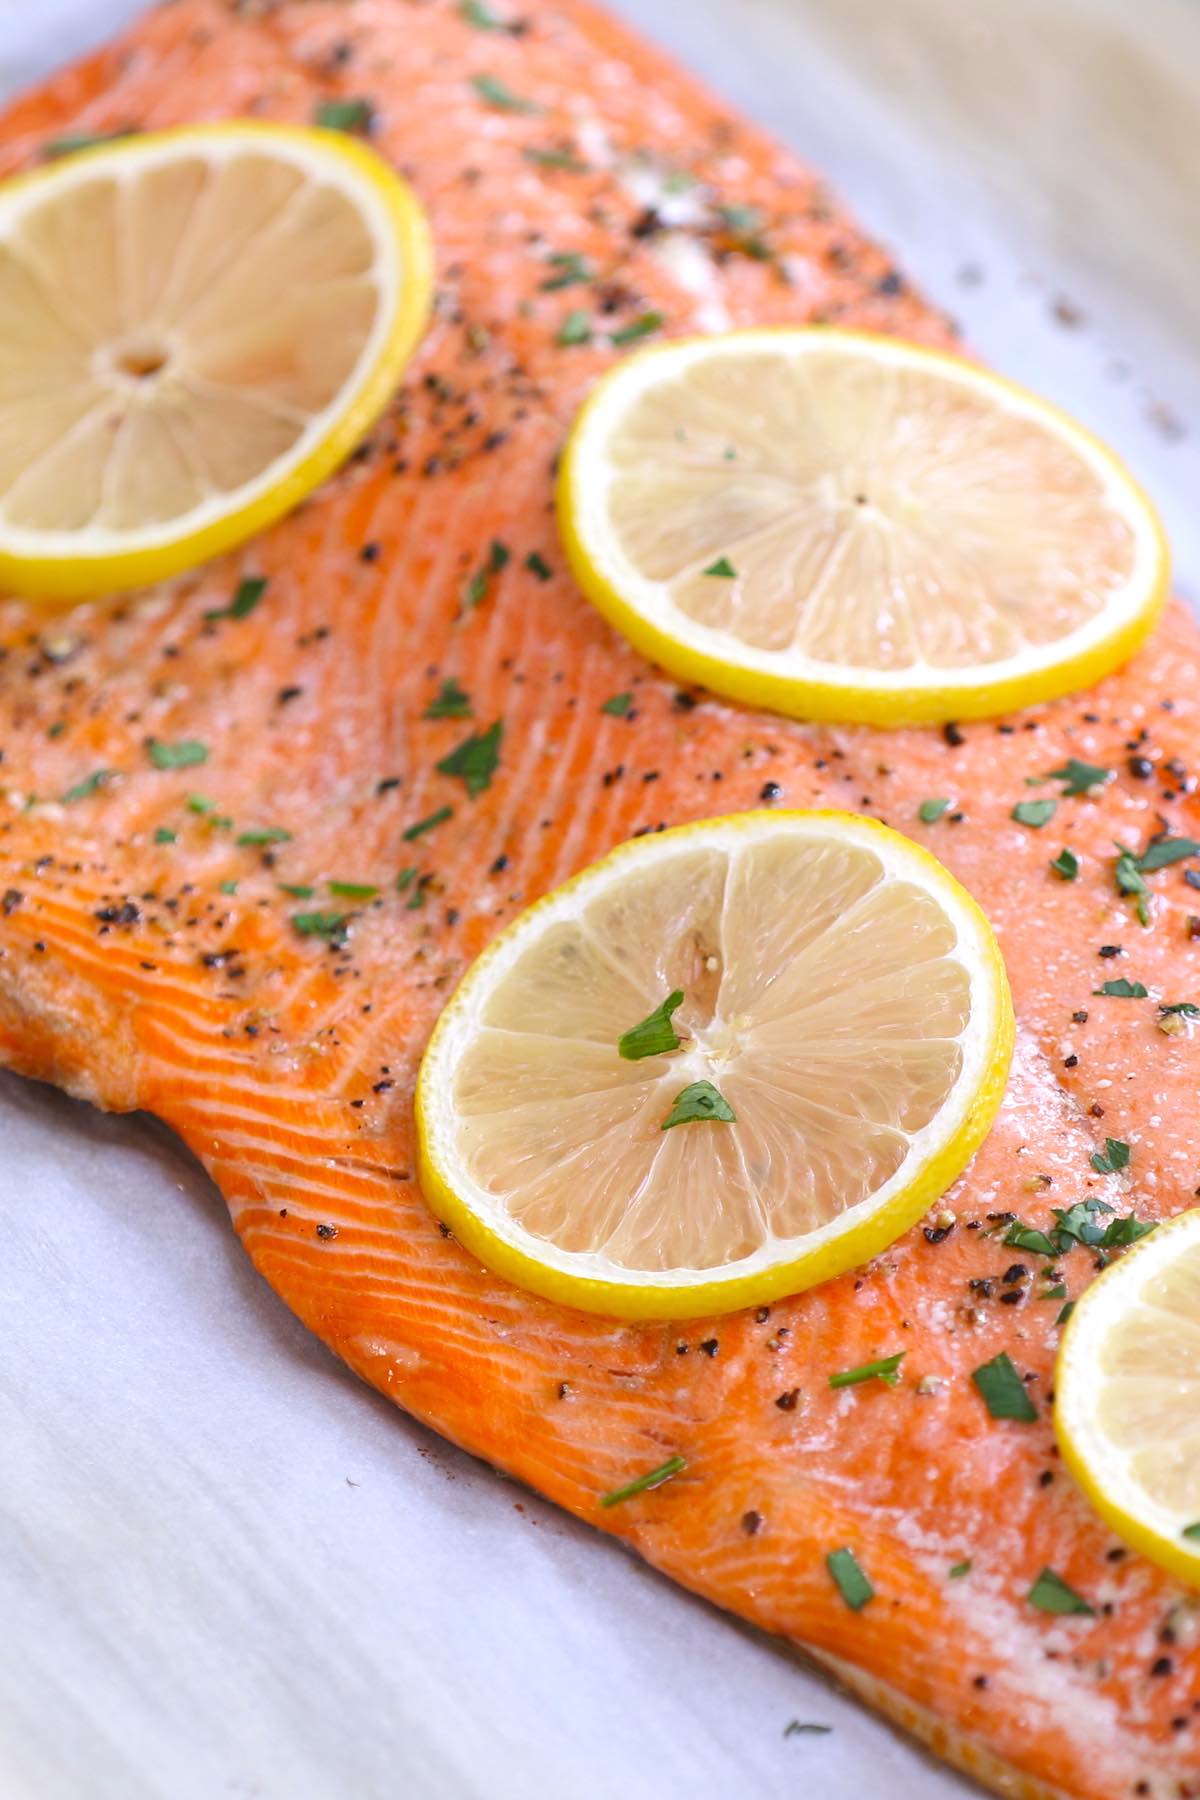 How to Tell if Salmon is Cooked (Know When Salmon is Done)